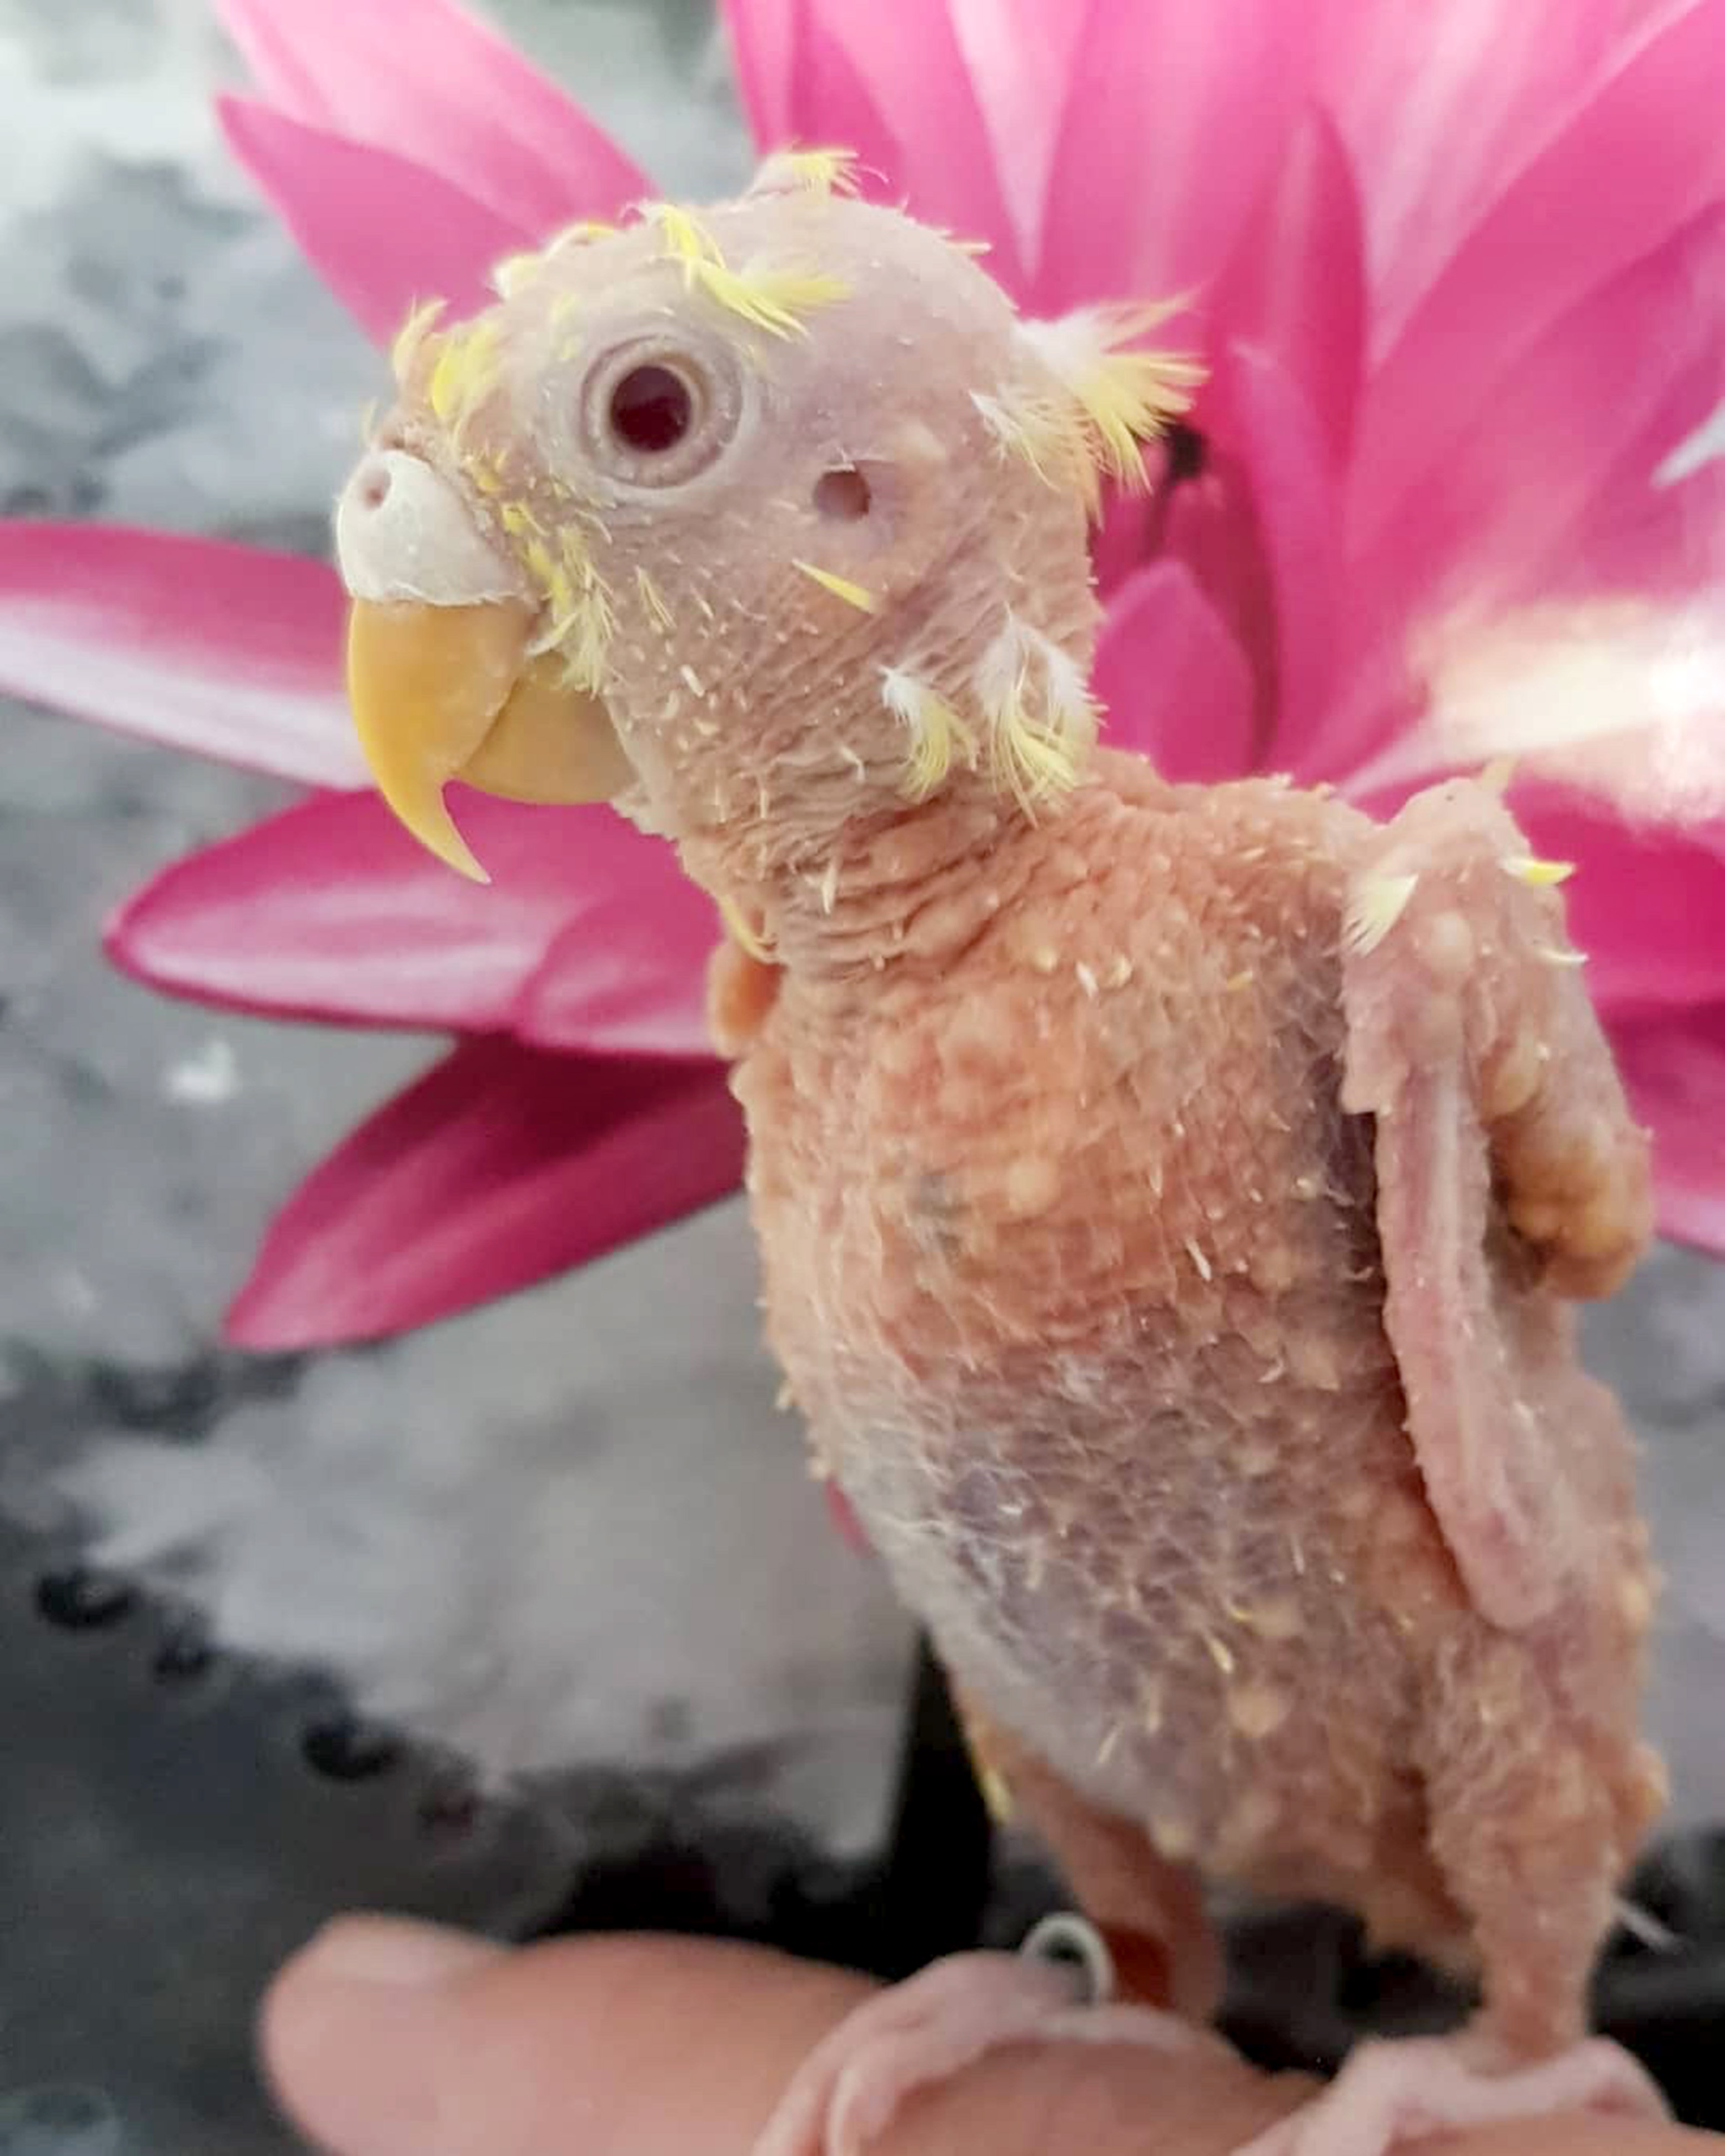 Featherless Budgie That Went Bald Due to Stress Thrives At Life Despite Vir...